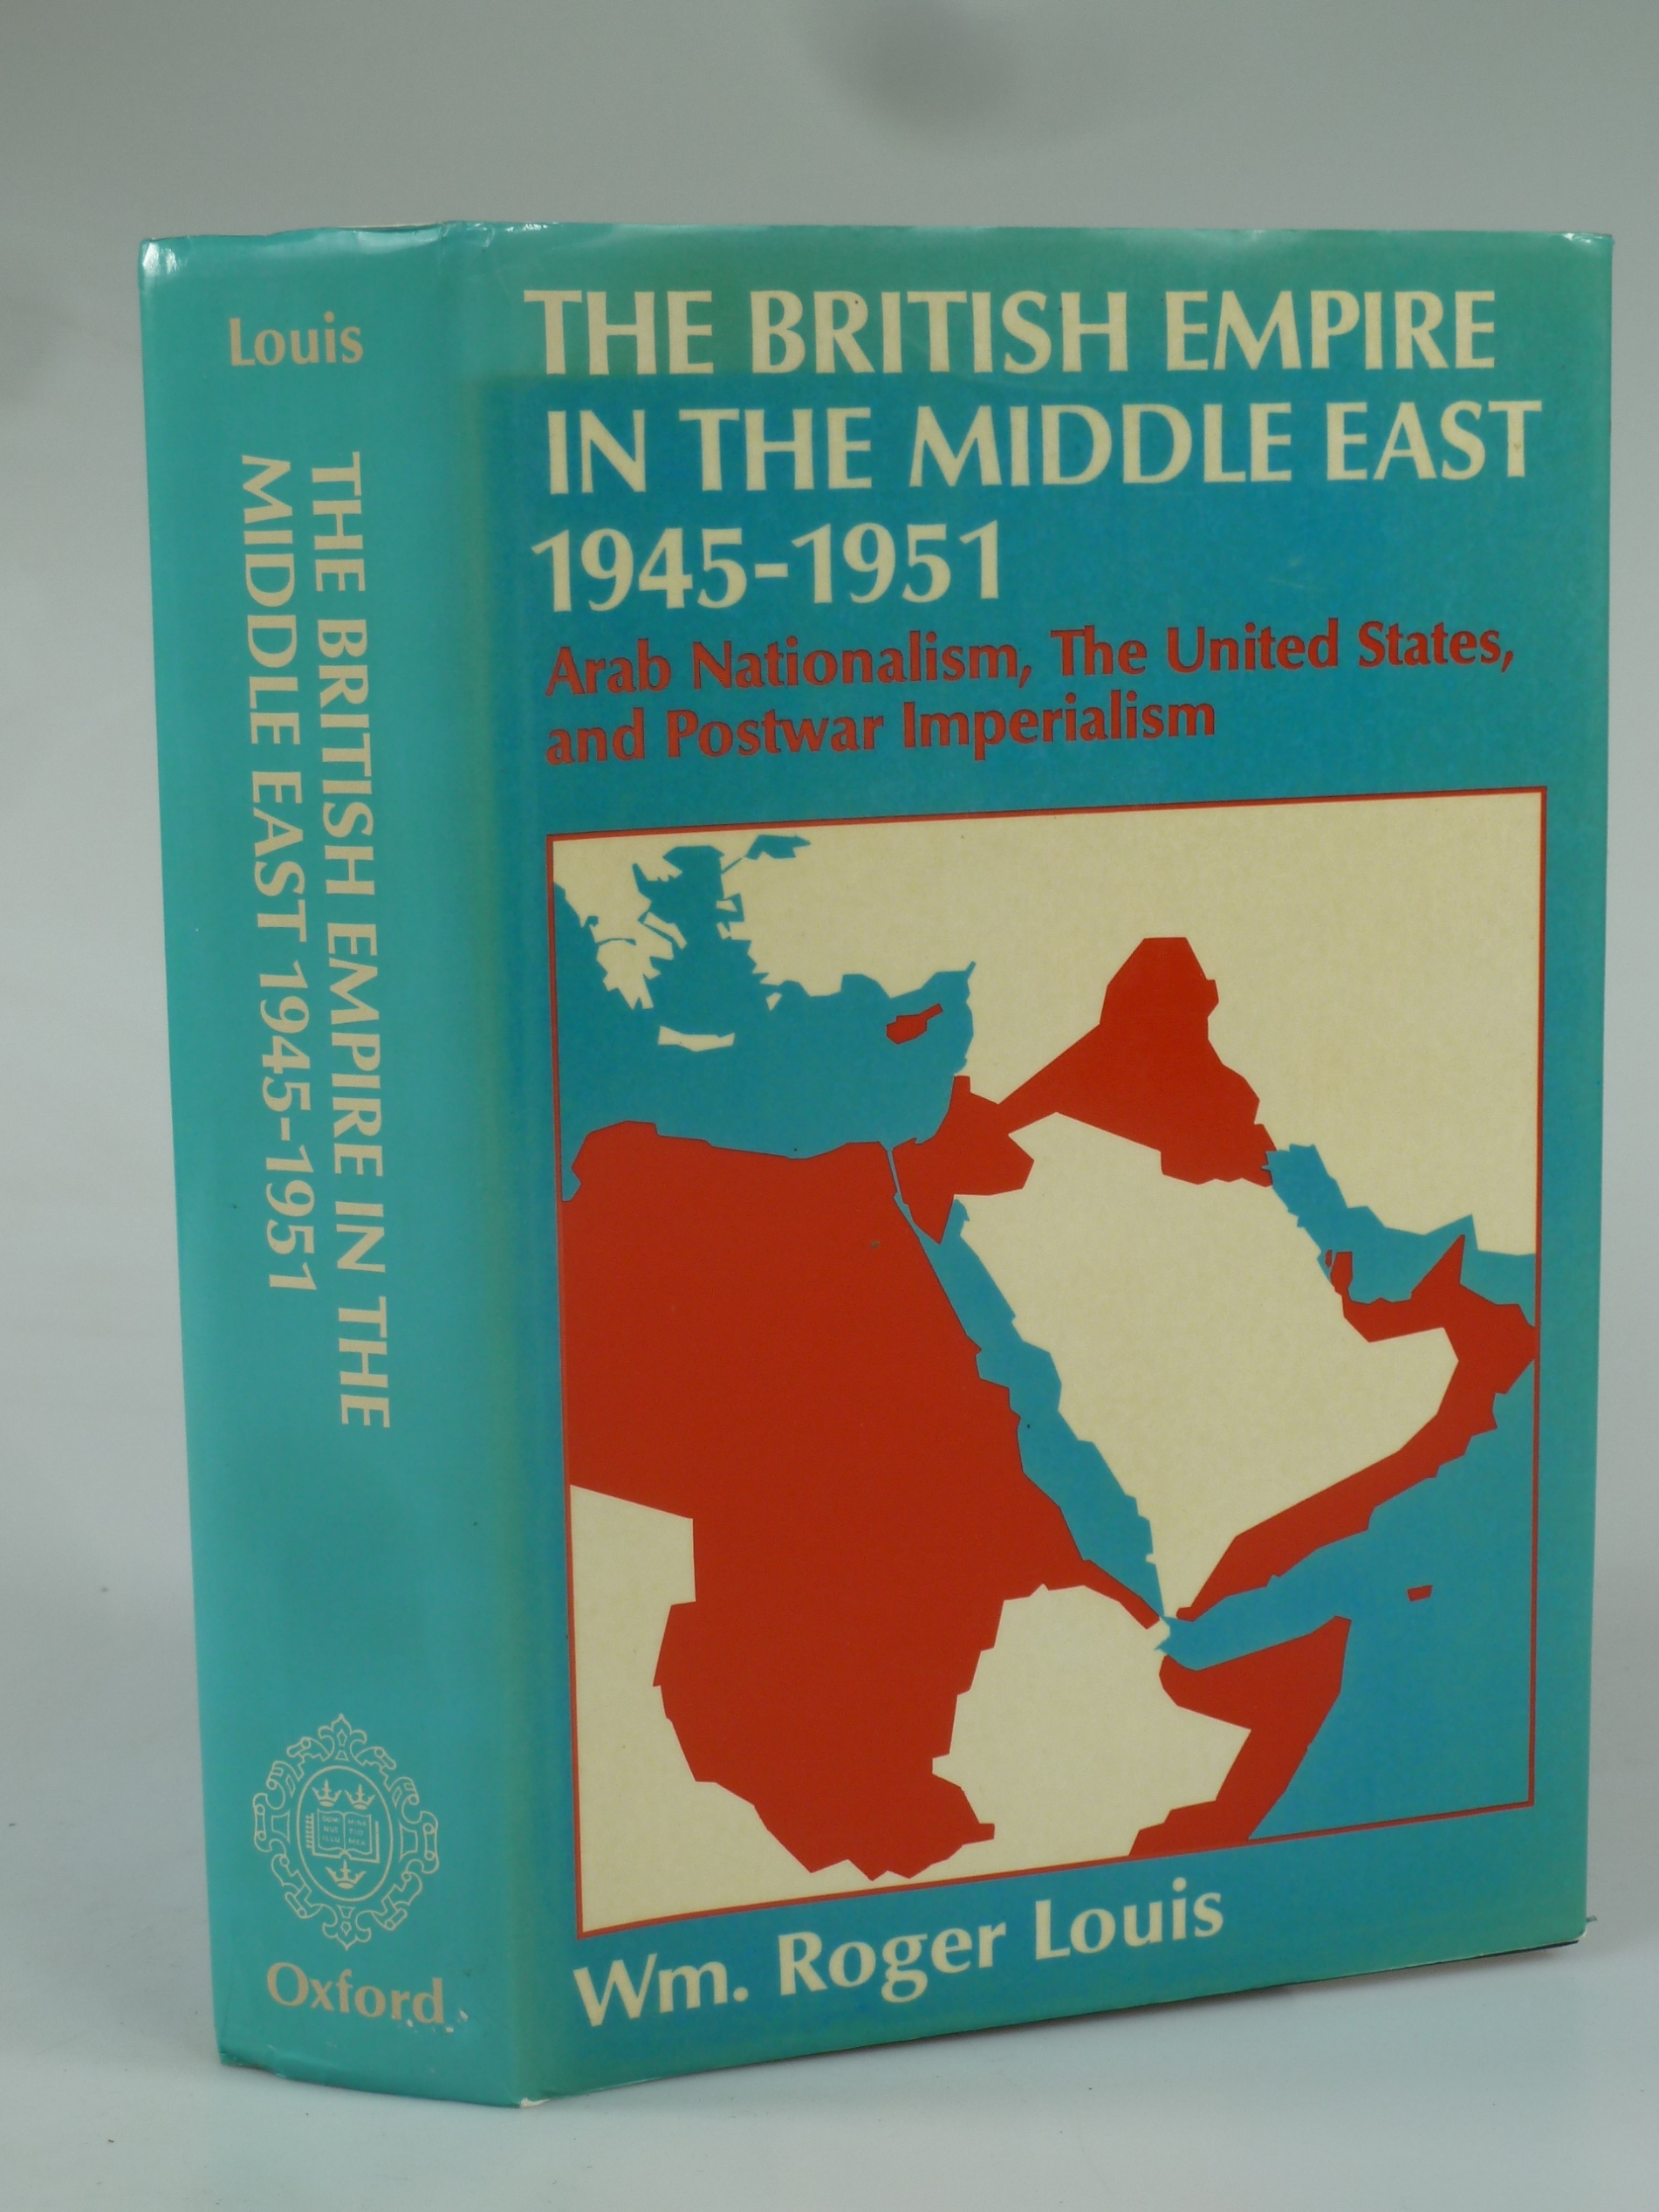 The British Empire in the Middle East 1945-1951. - LOUIS, Wm. Roger.